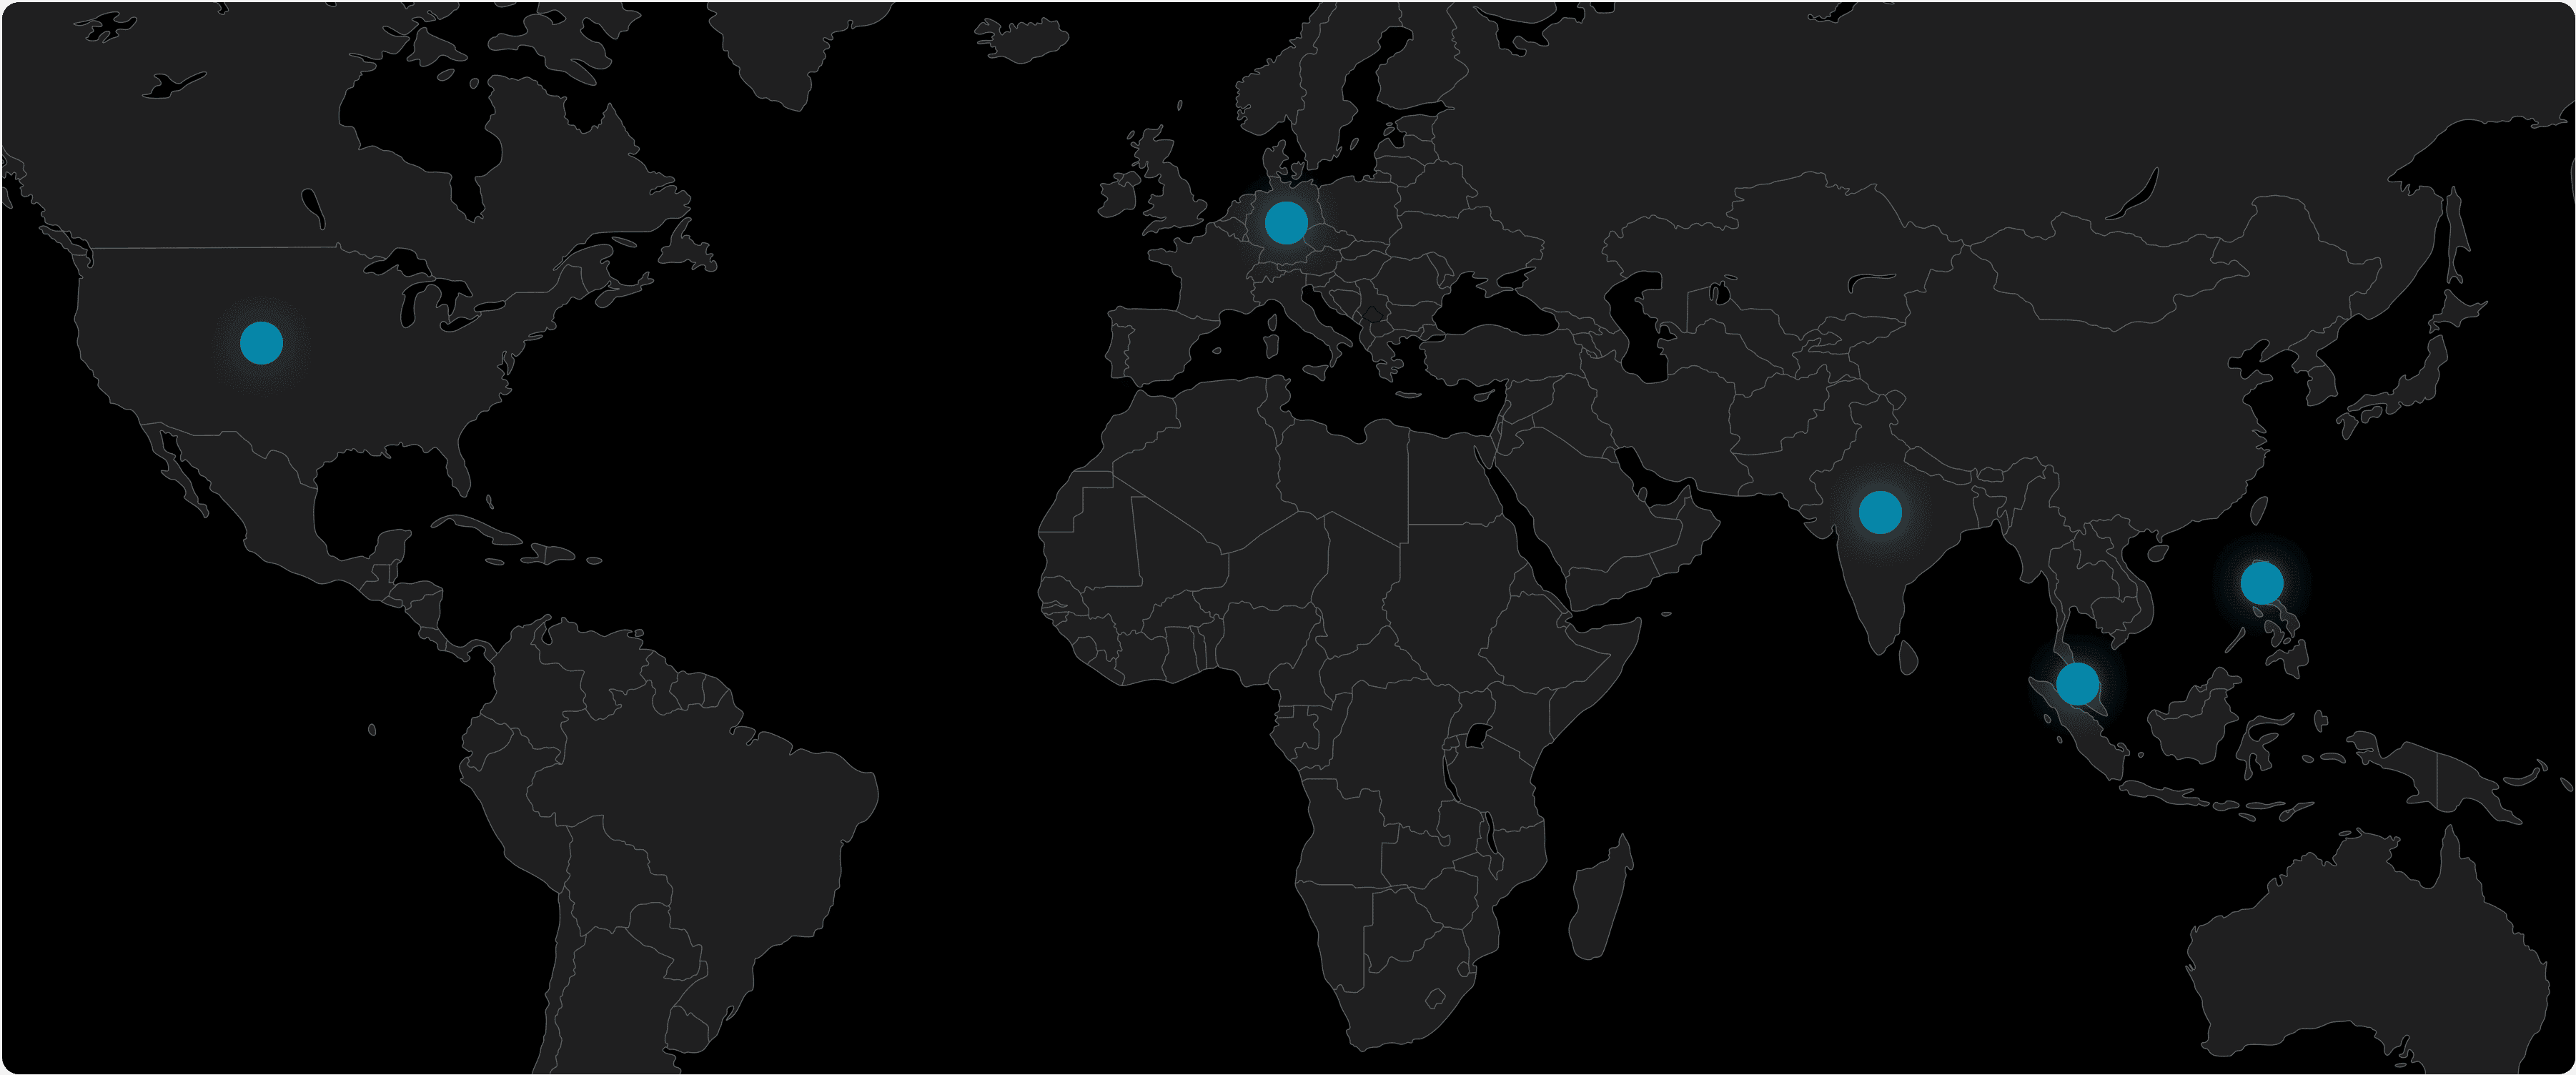 Global map displaying the distribution of Samespace's data centers, represented by bright blue circles against a dark background, symbolizing the company's international infrastructure footprint.